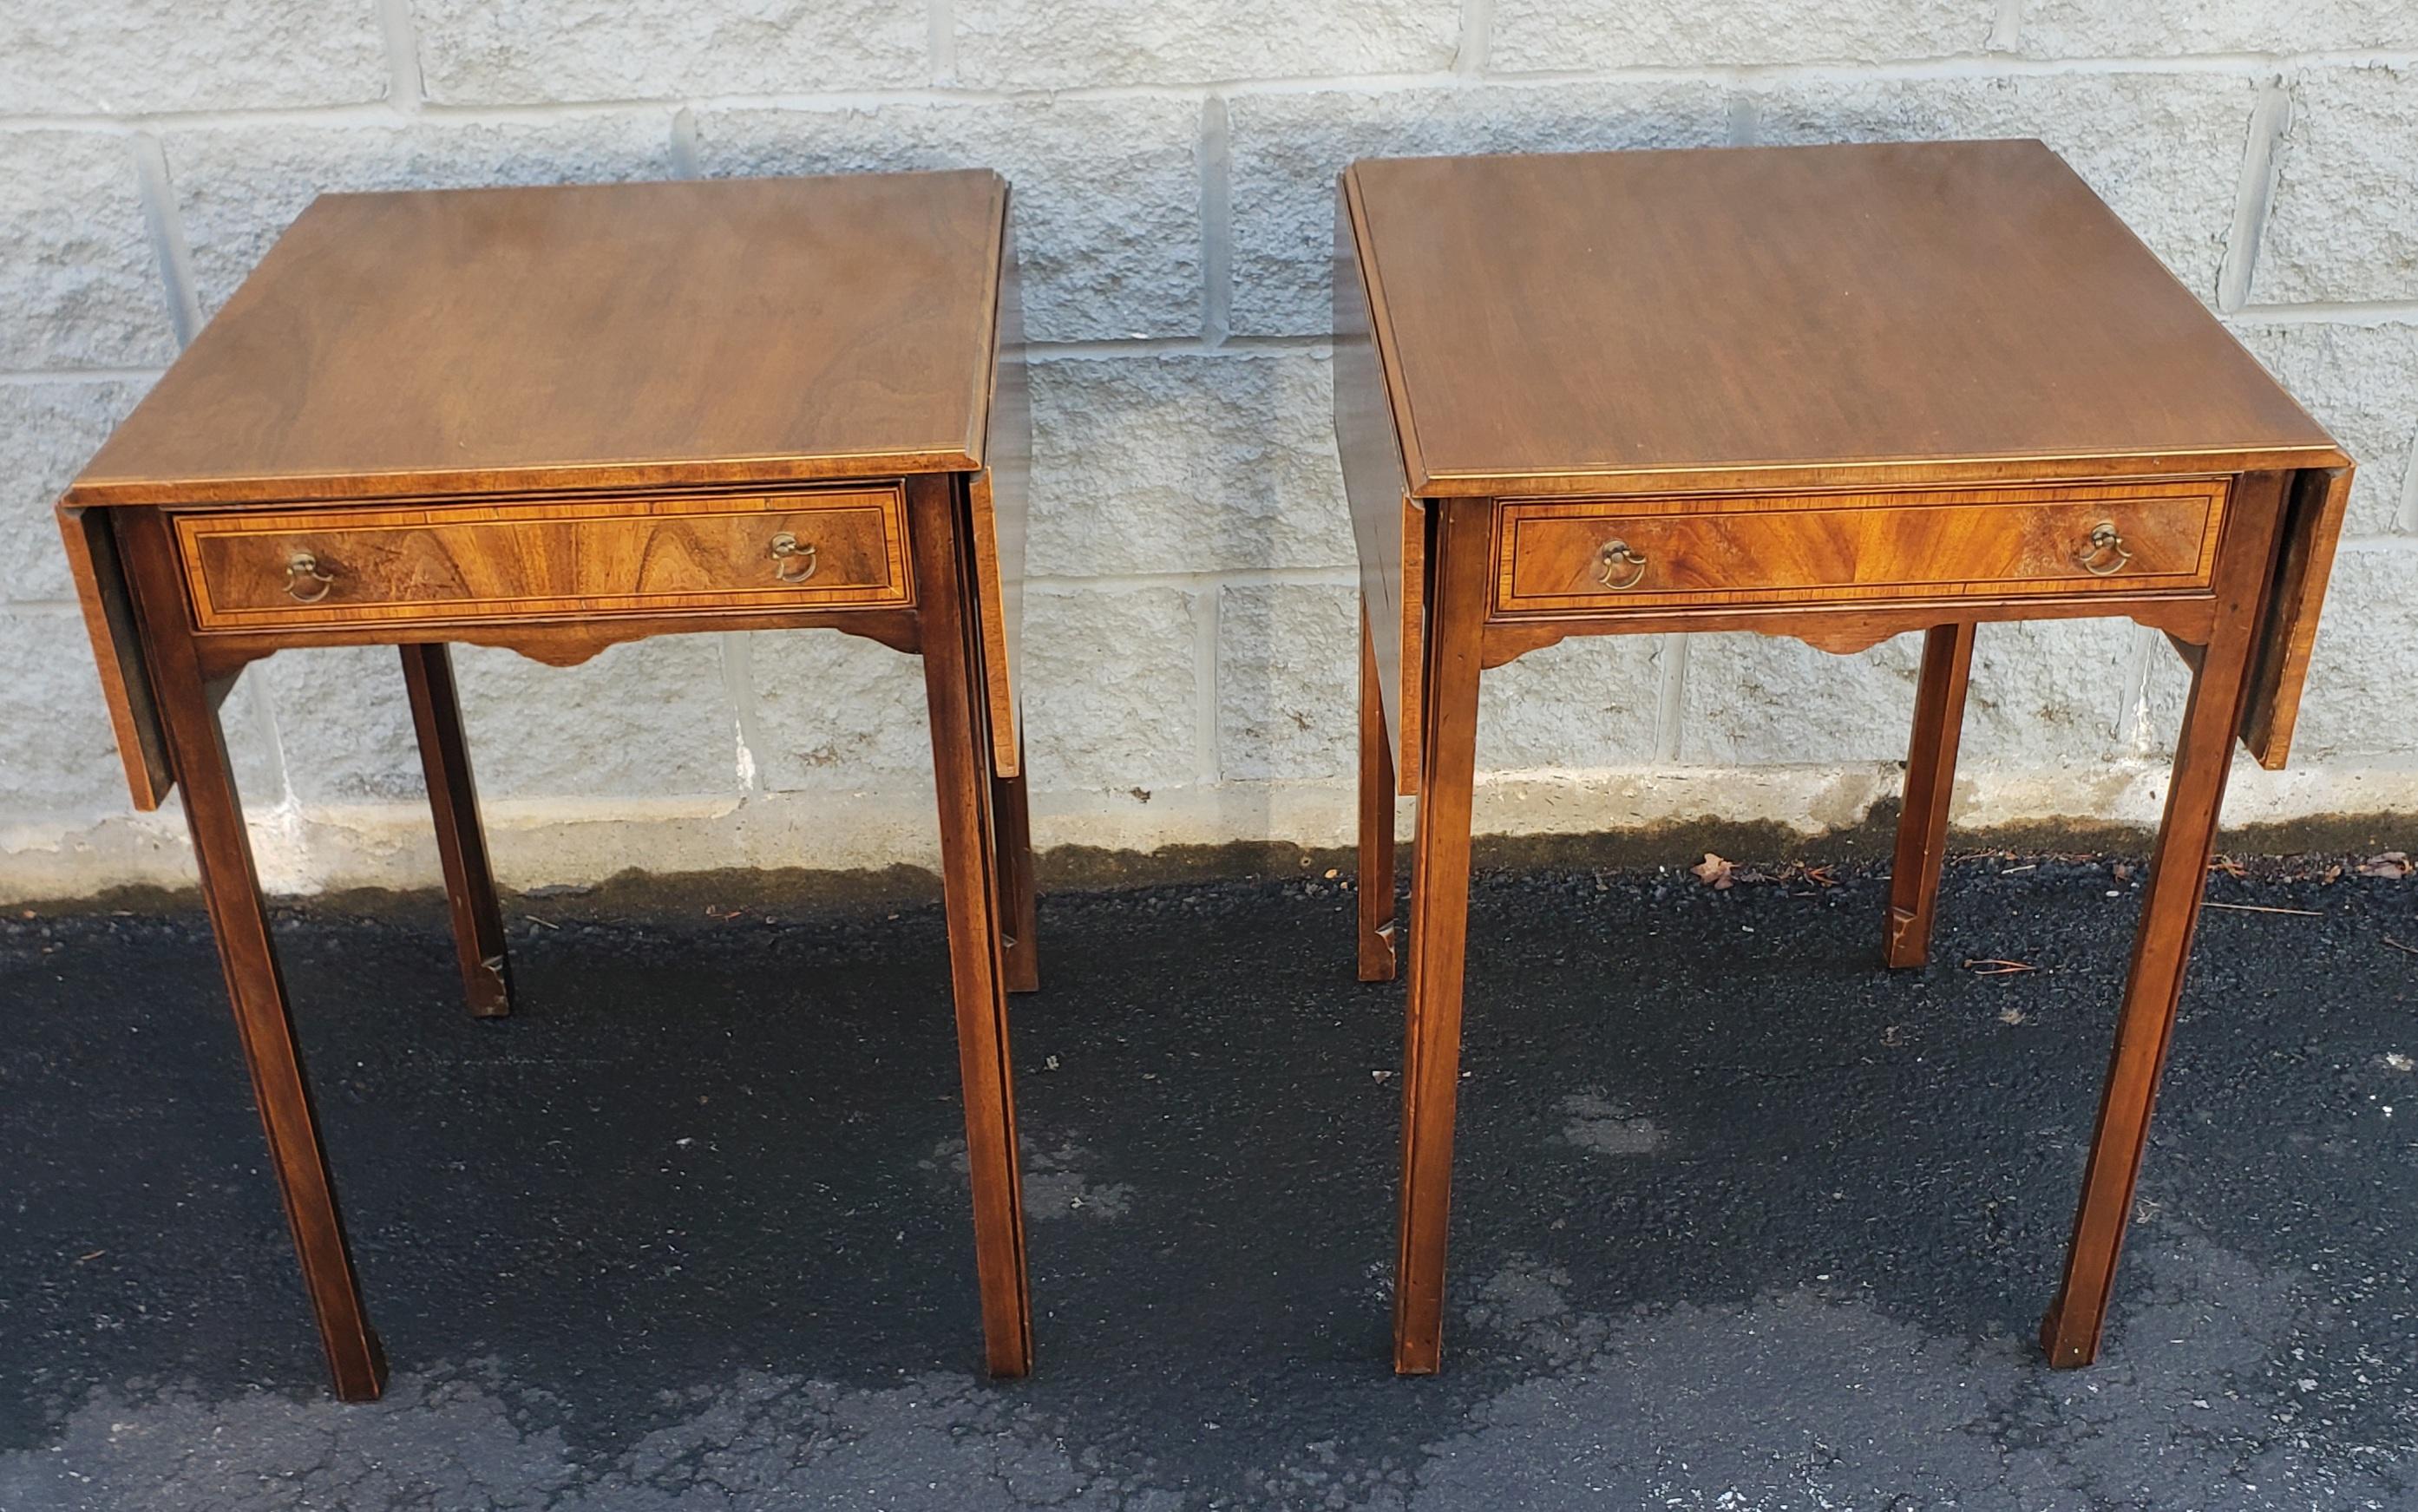 A patinated pair of 1930s George III cross-banded mahogany inlay pembroke tables measures 20.5